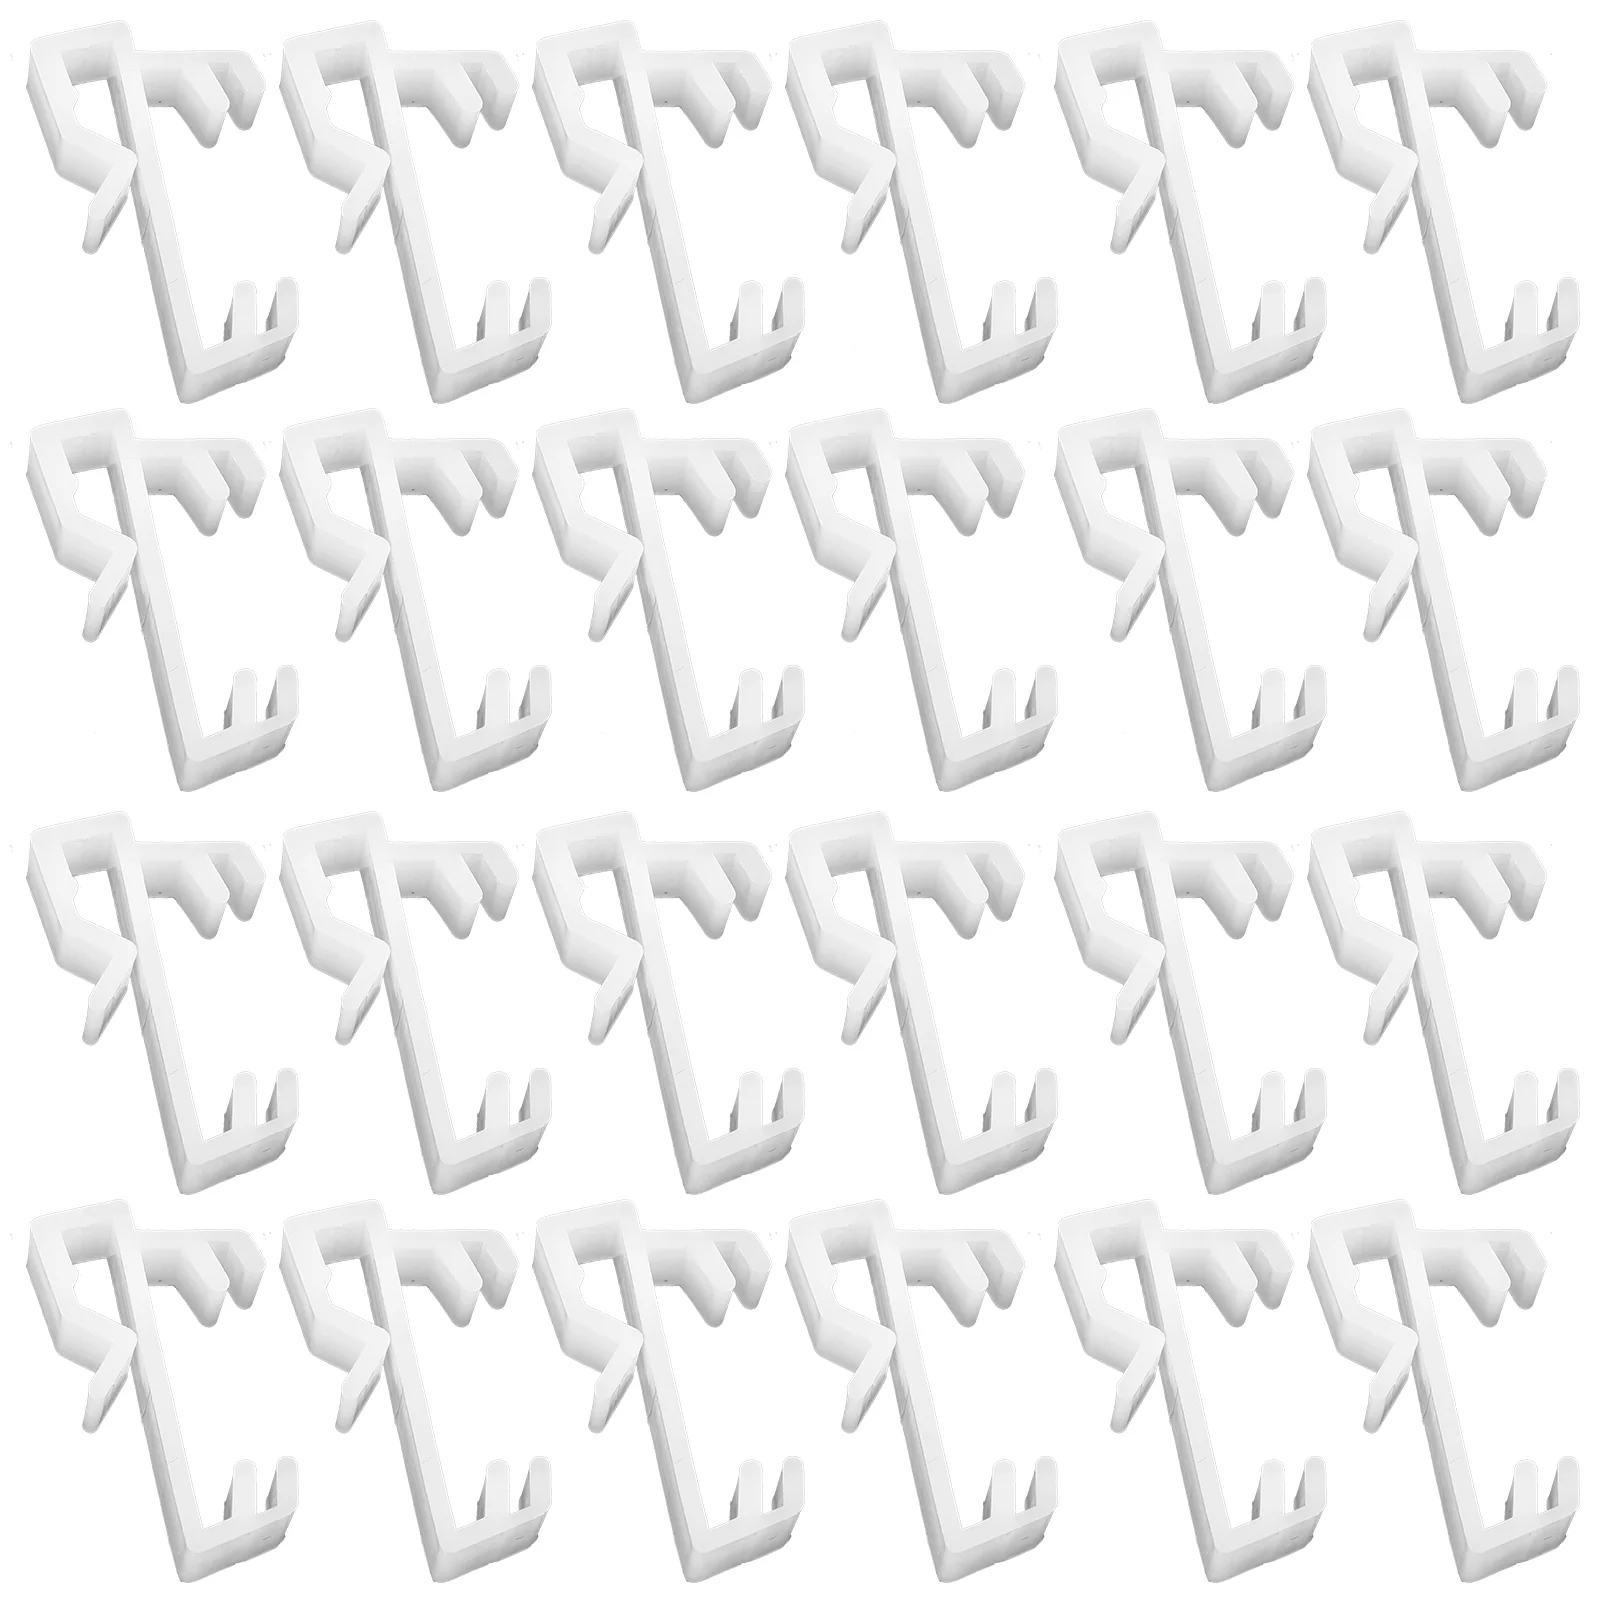 

24 Pcs Valance Clamps Plastic Clips Curtains Venetian Blind Replacement Pp Blinds Office Window